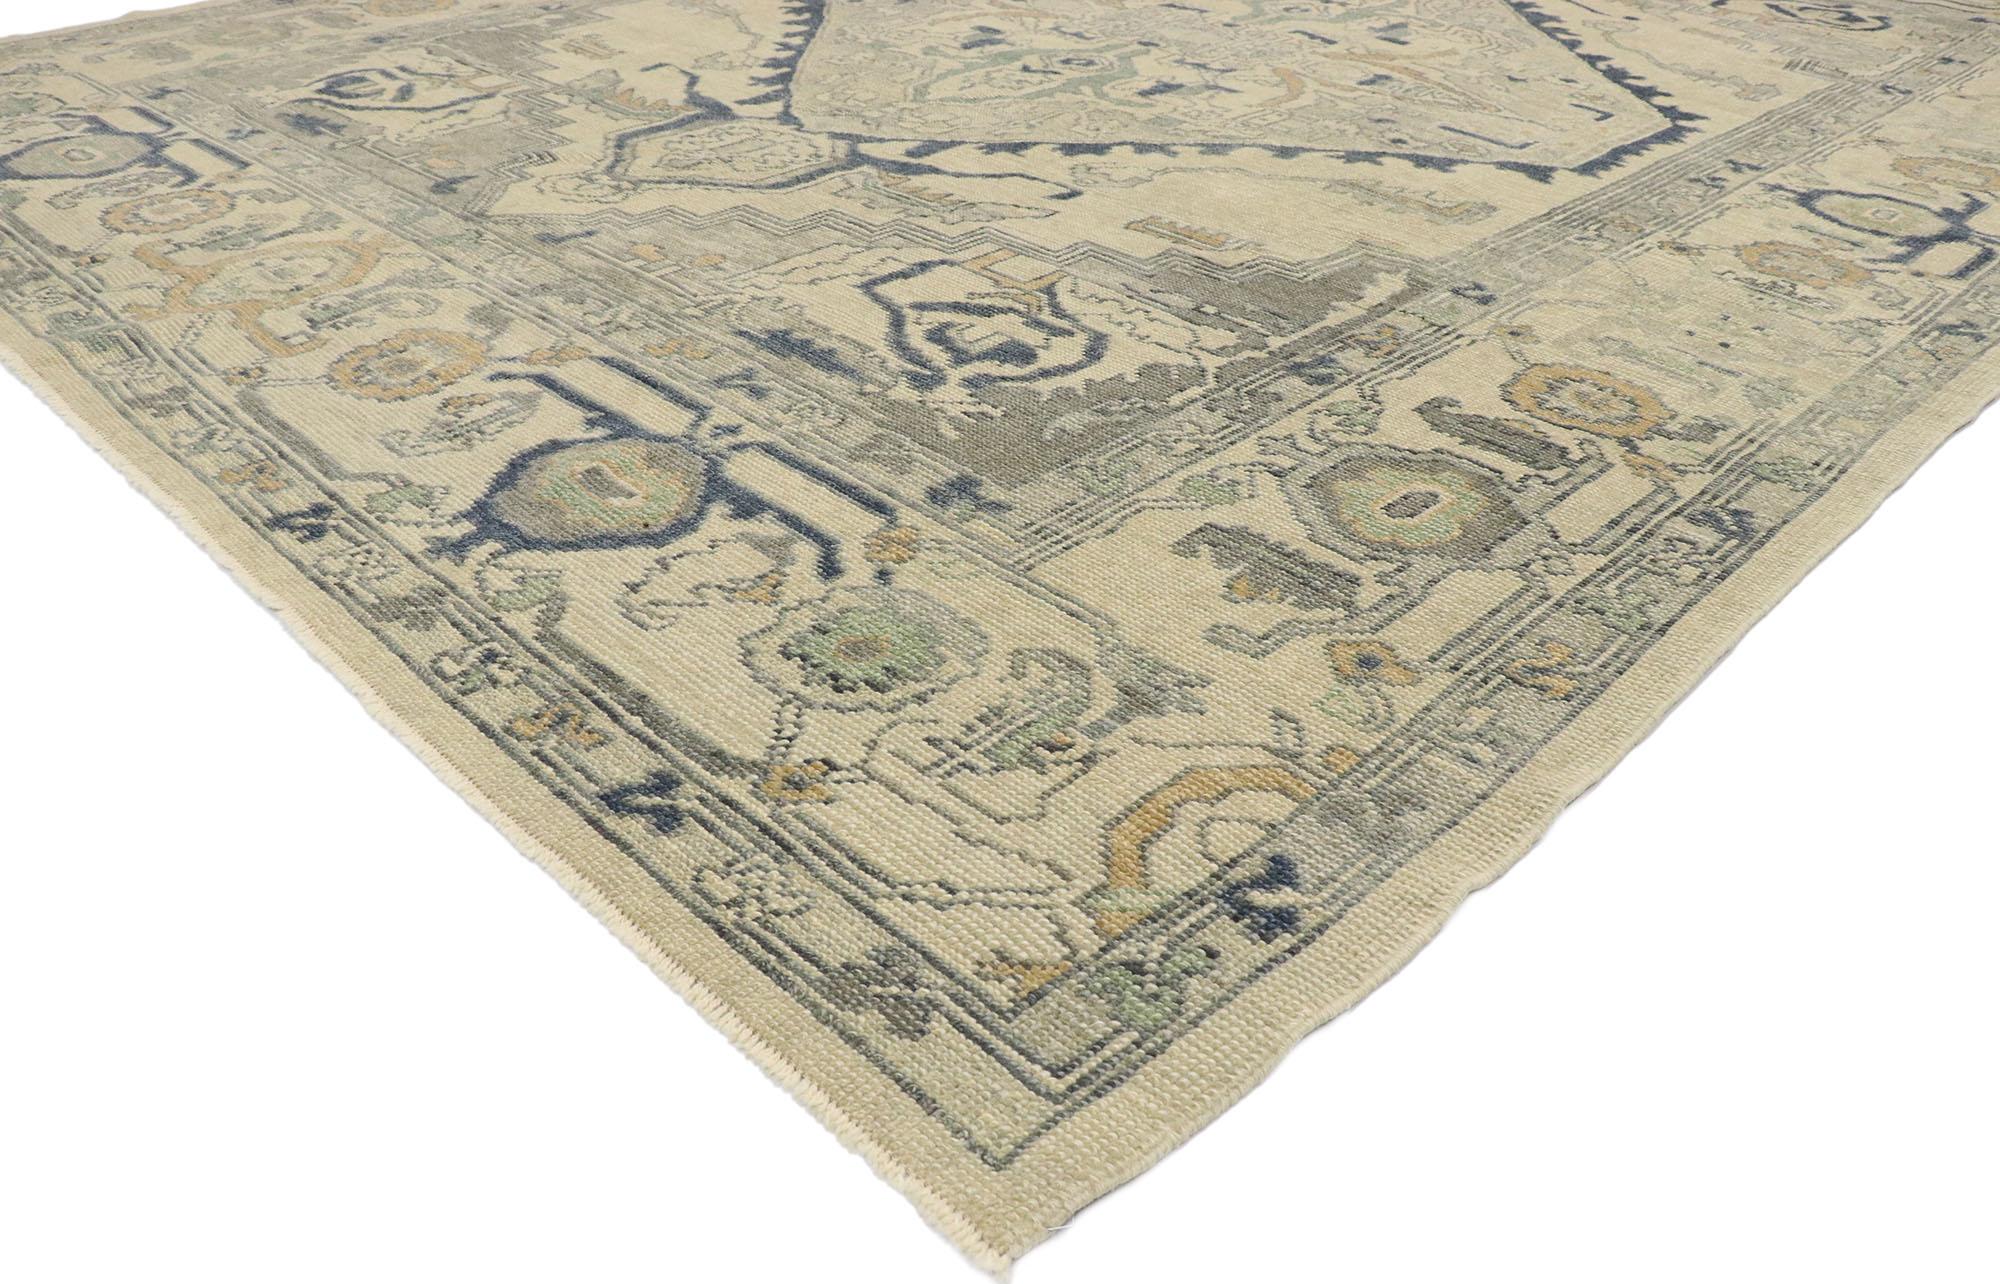 53404, New Modern Style Turkish Oushak Rug. This hand knotted wool new Turkish Oushak rug features a large polygonal botanical medallion floating in the center of an abrashed sandy-beige field. Angular foliage with a stepped border and rectilinear